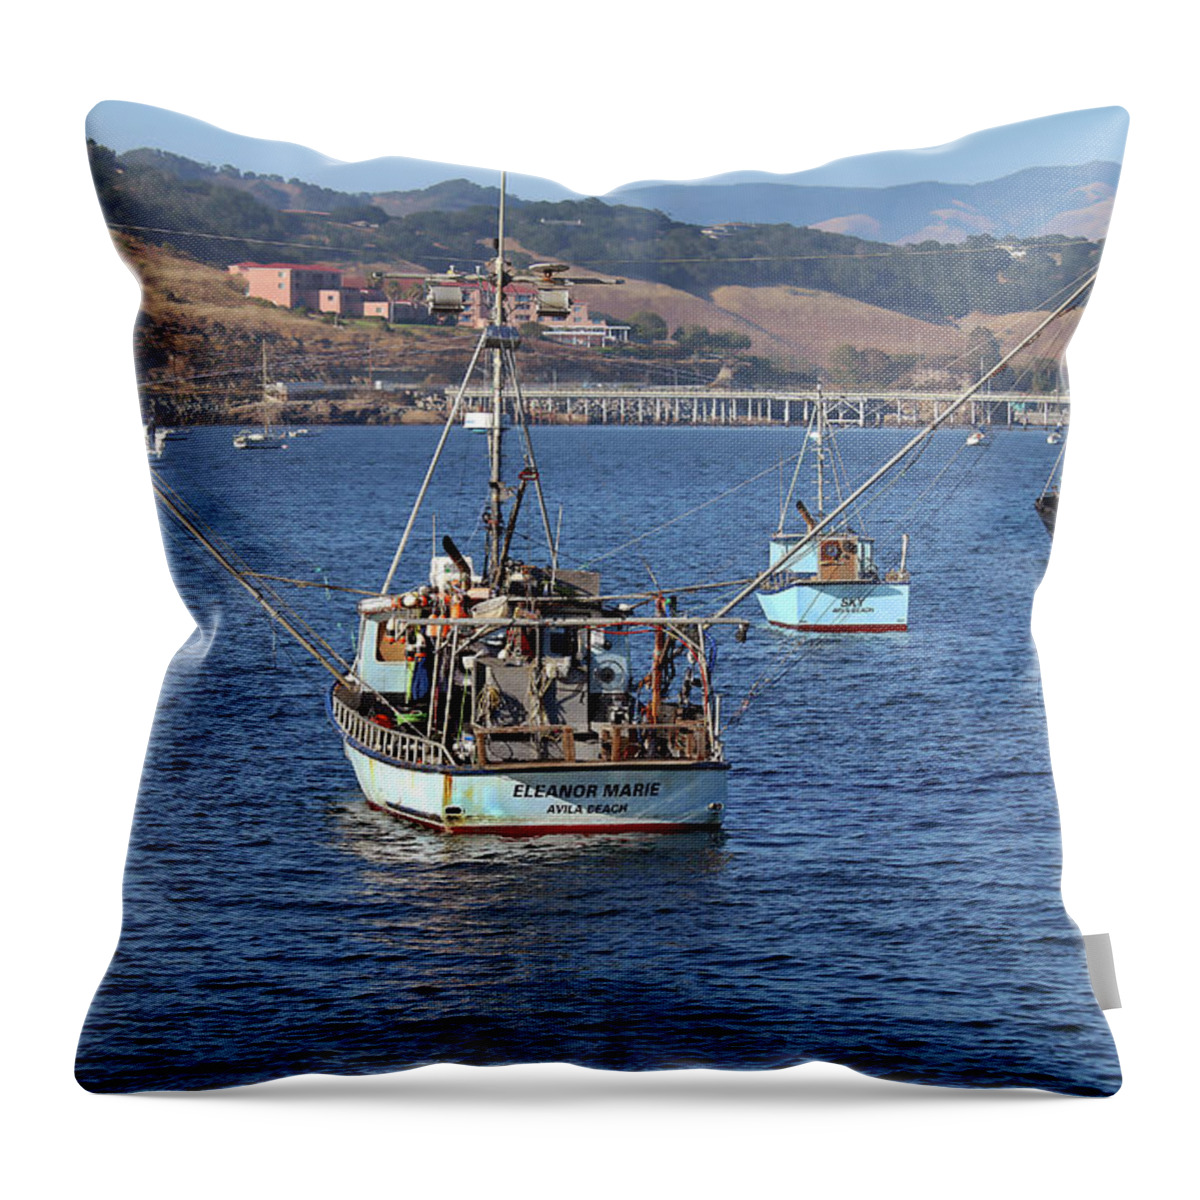 Port San Luis Throw Pillow featuring the photograph The Eleanore Marie by Art Block Collections